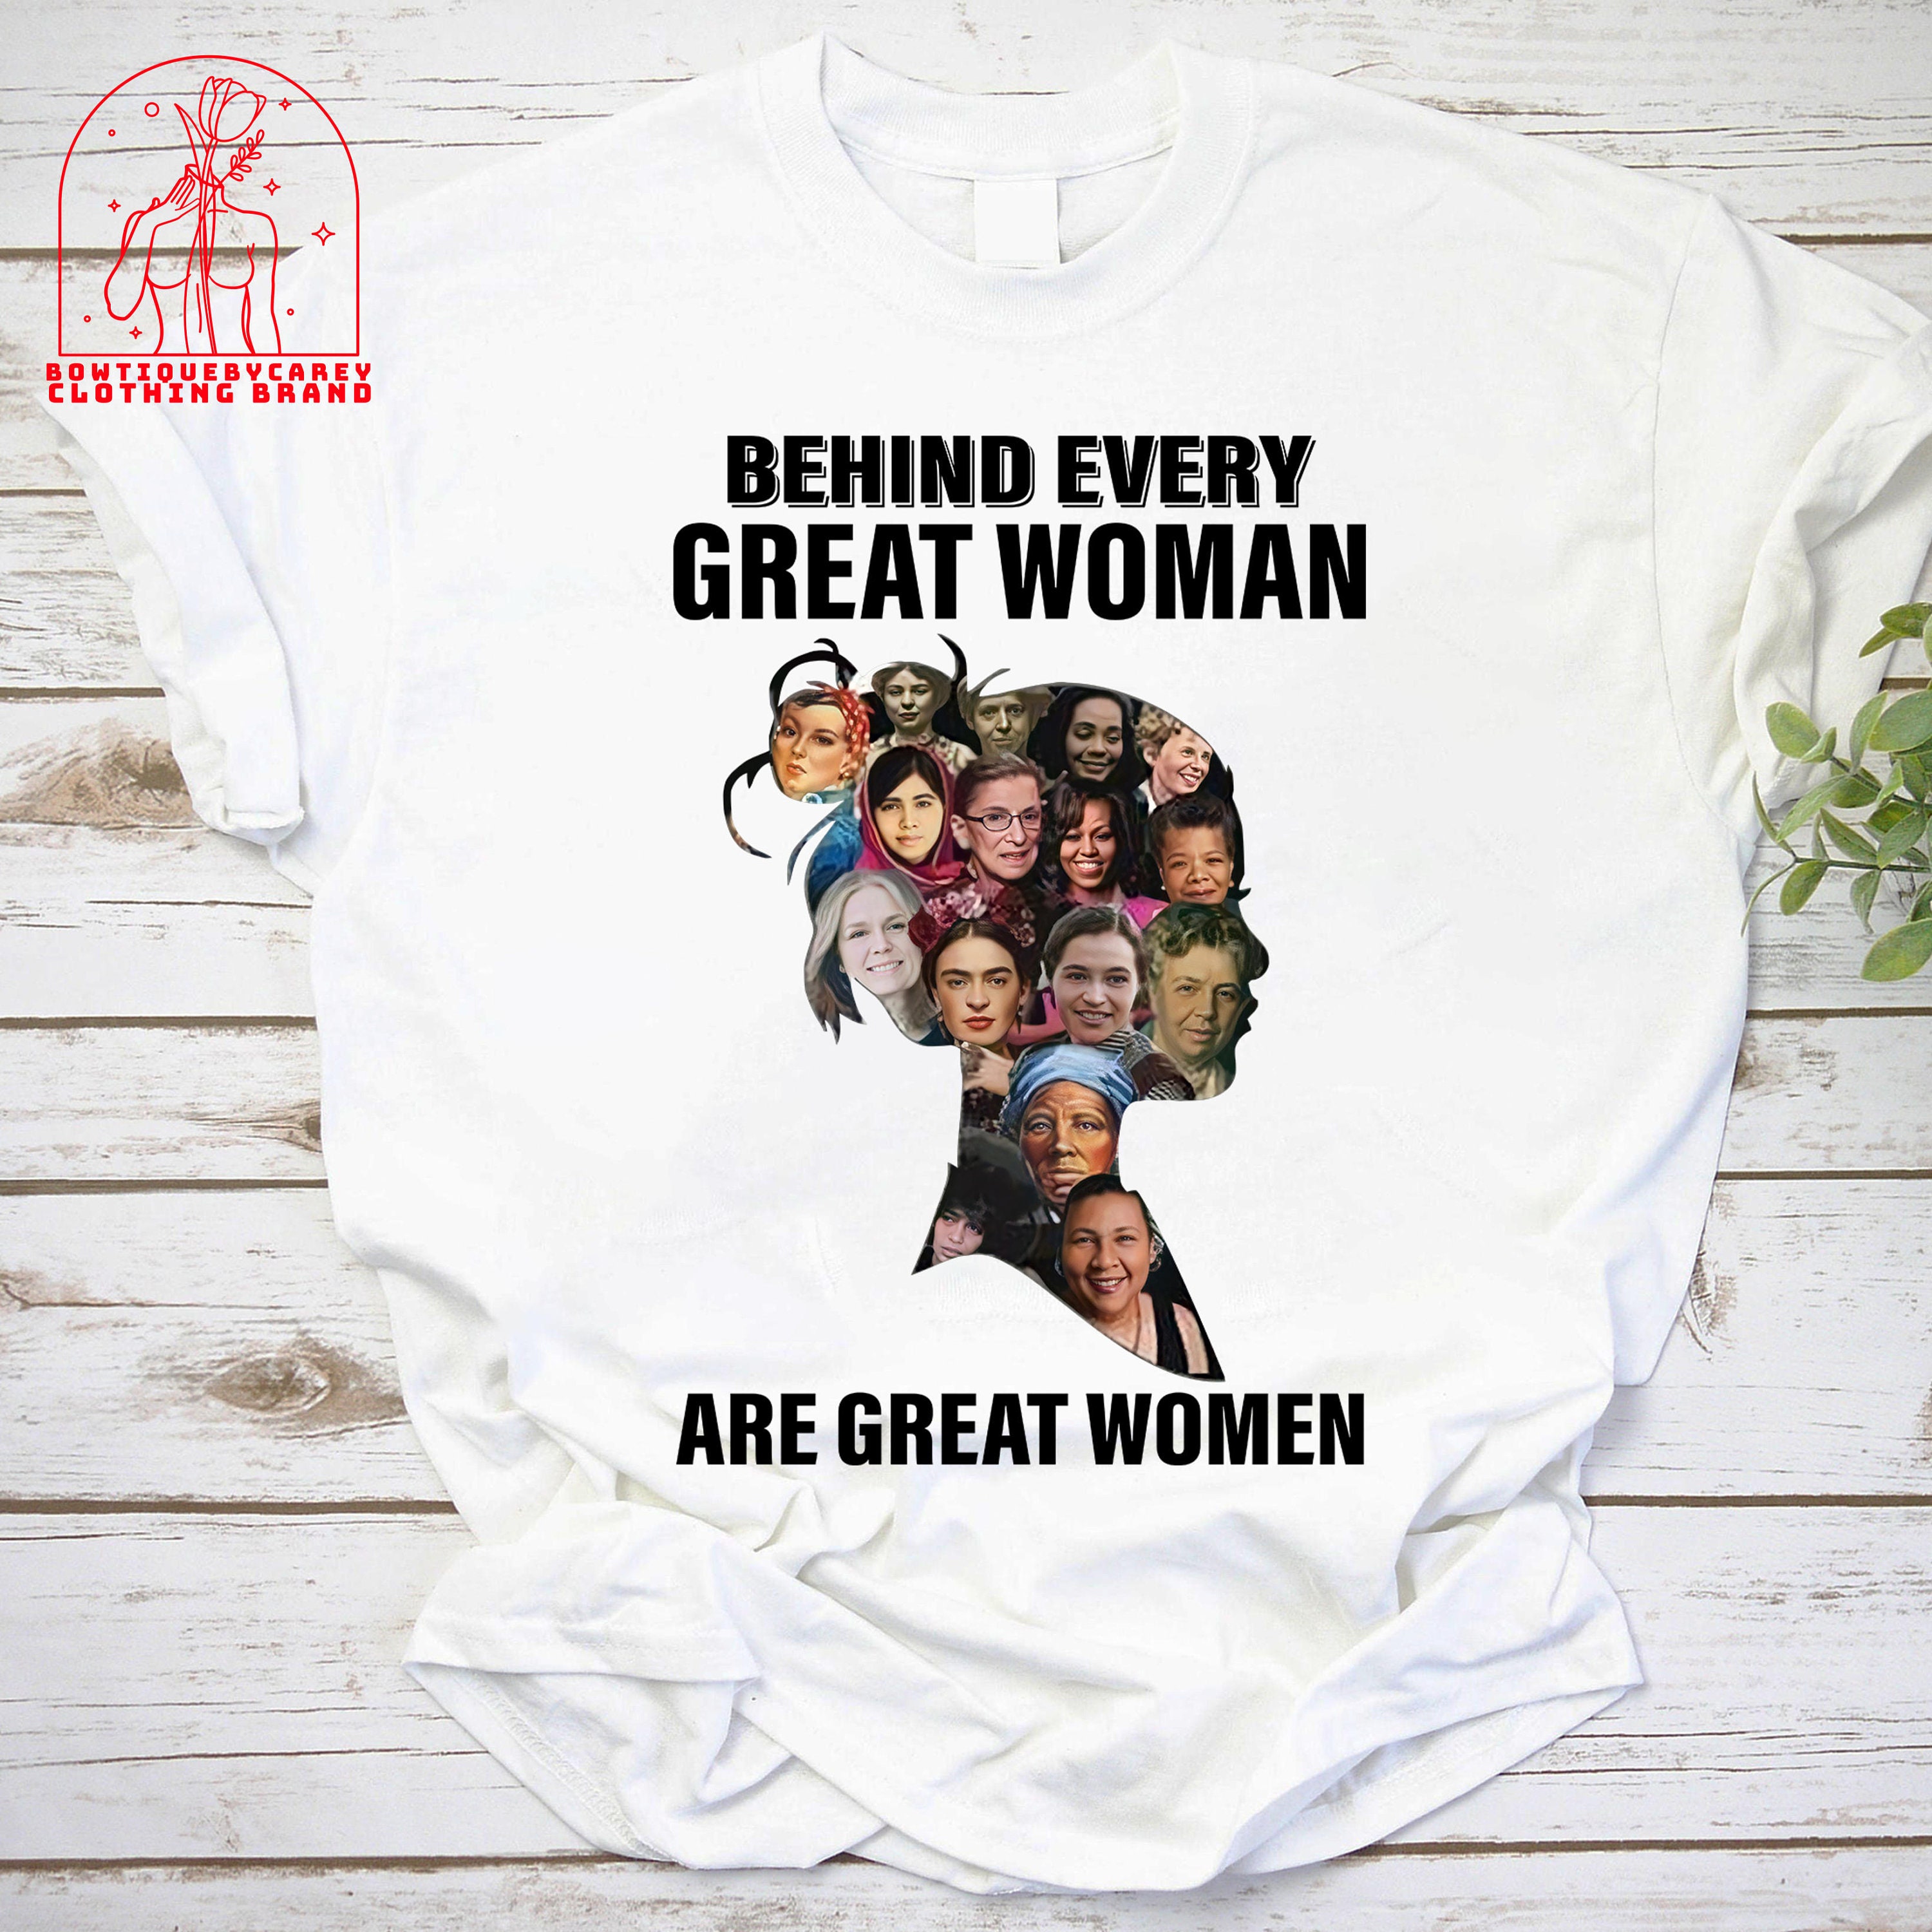 Behind Every Great Woman Are Great Women Feminists Woman Rights Rbg Ruth Bader Ginsburg Unisex T-Shirt